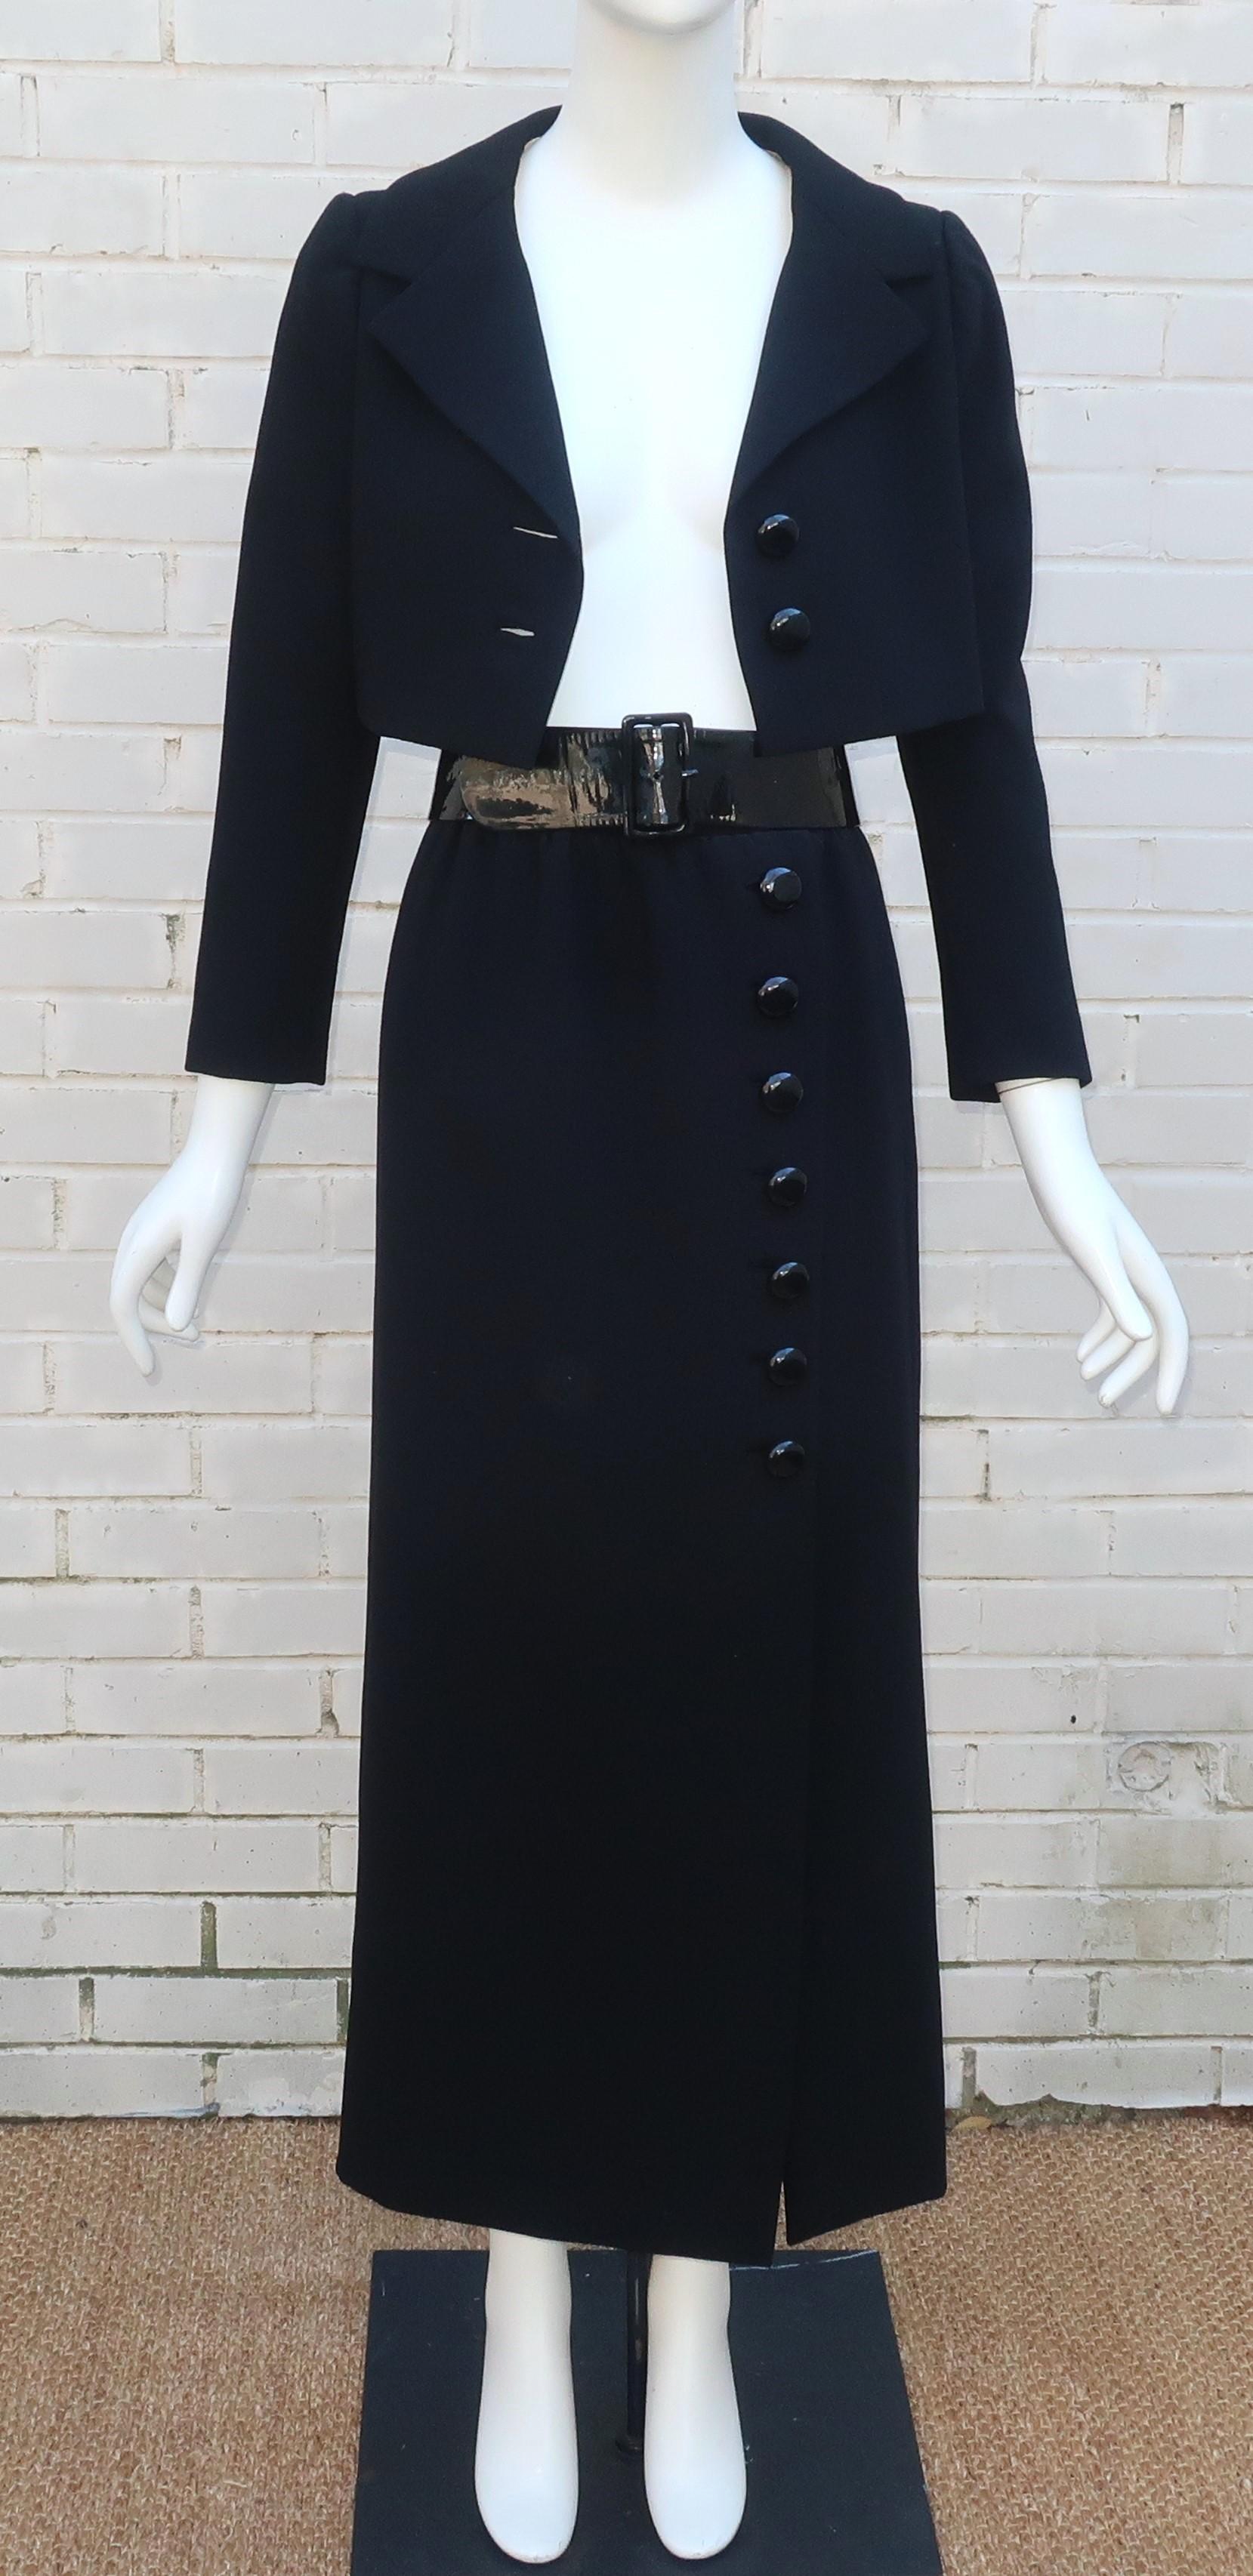 Norman Norell Belted Maxi Skirt Evening Suit With Cropped Jacket, 1968 For Sale 1